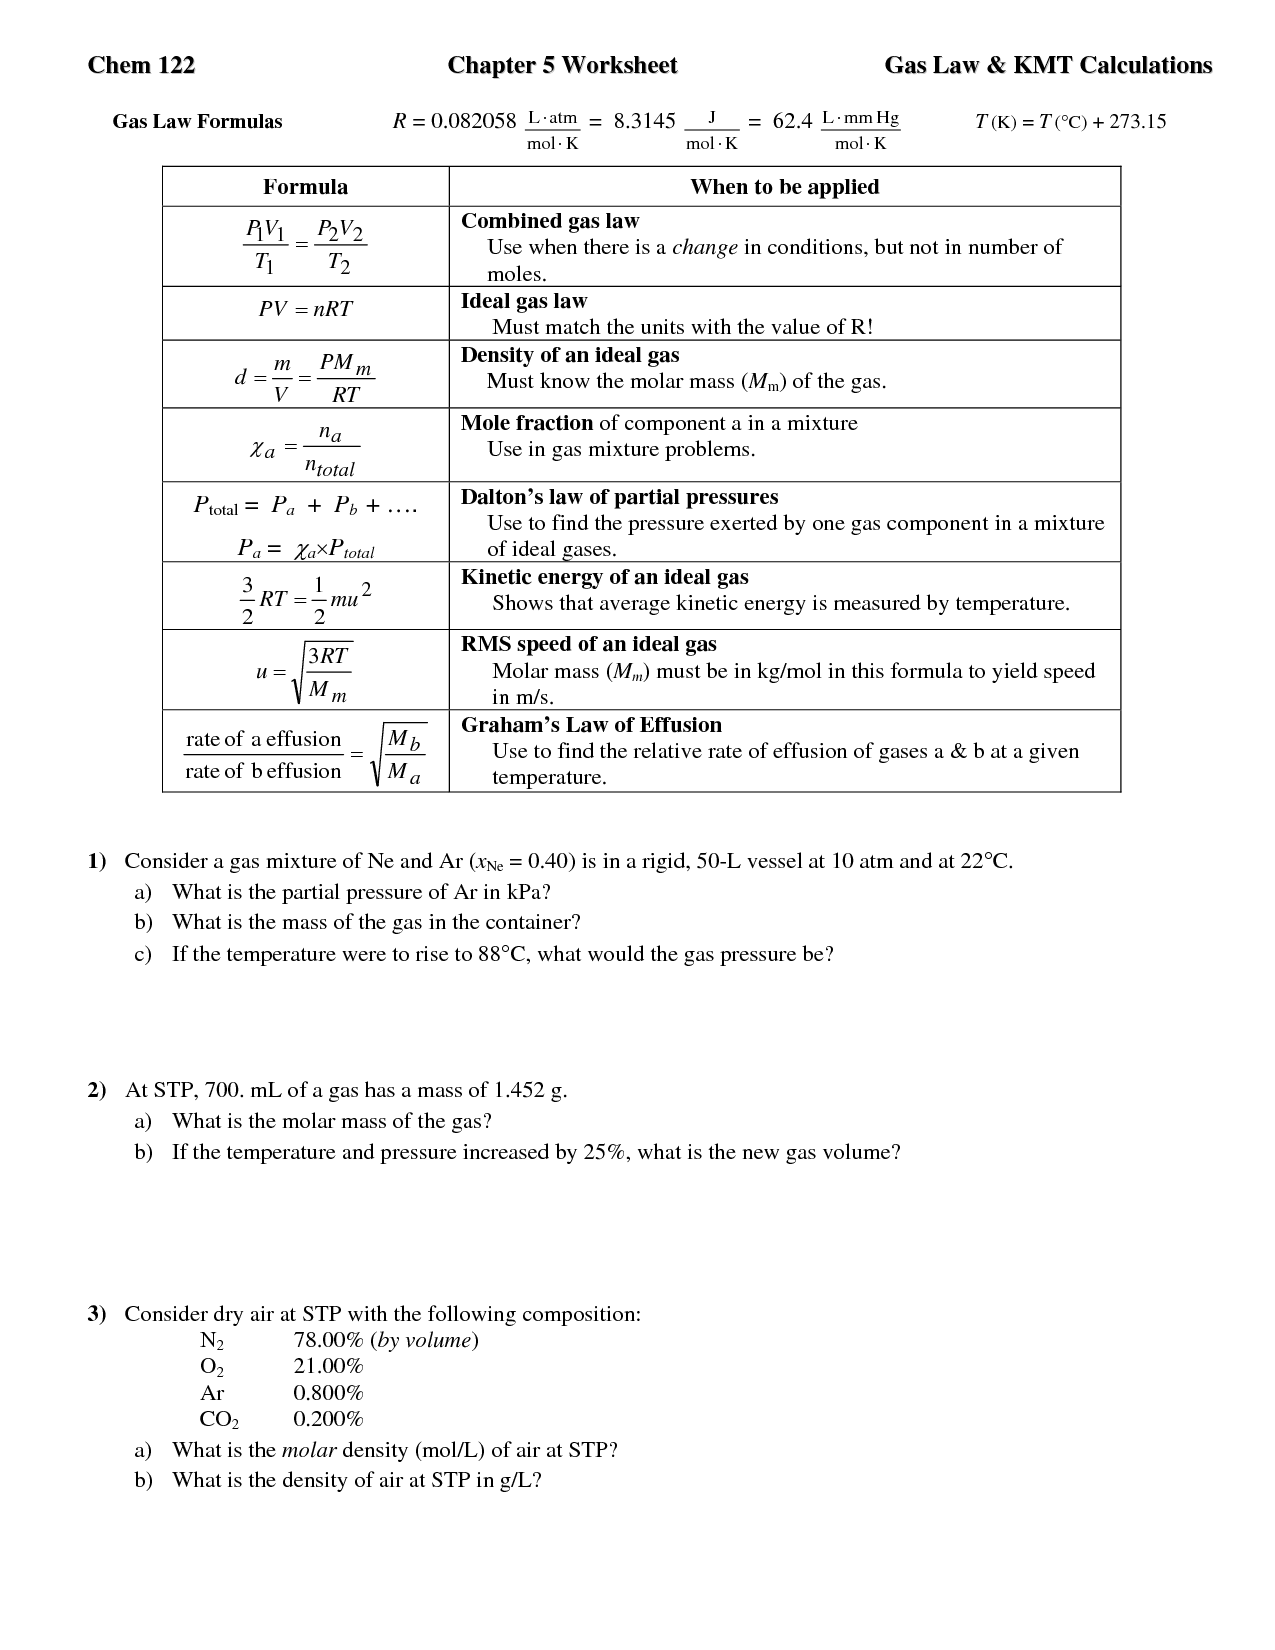 Ideal Gas Law Worksheet Answers Image